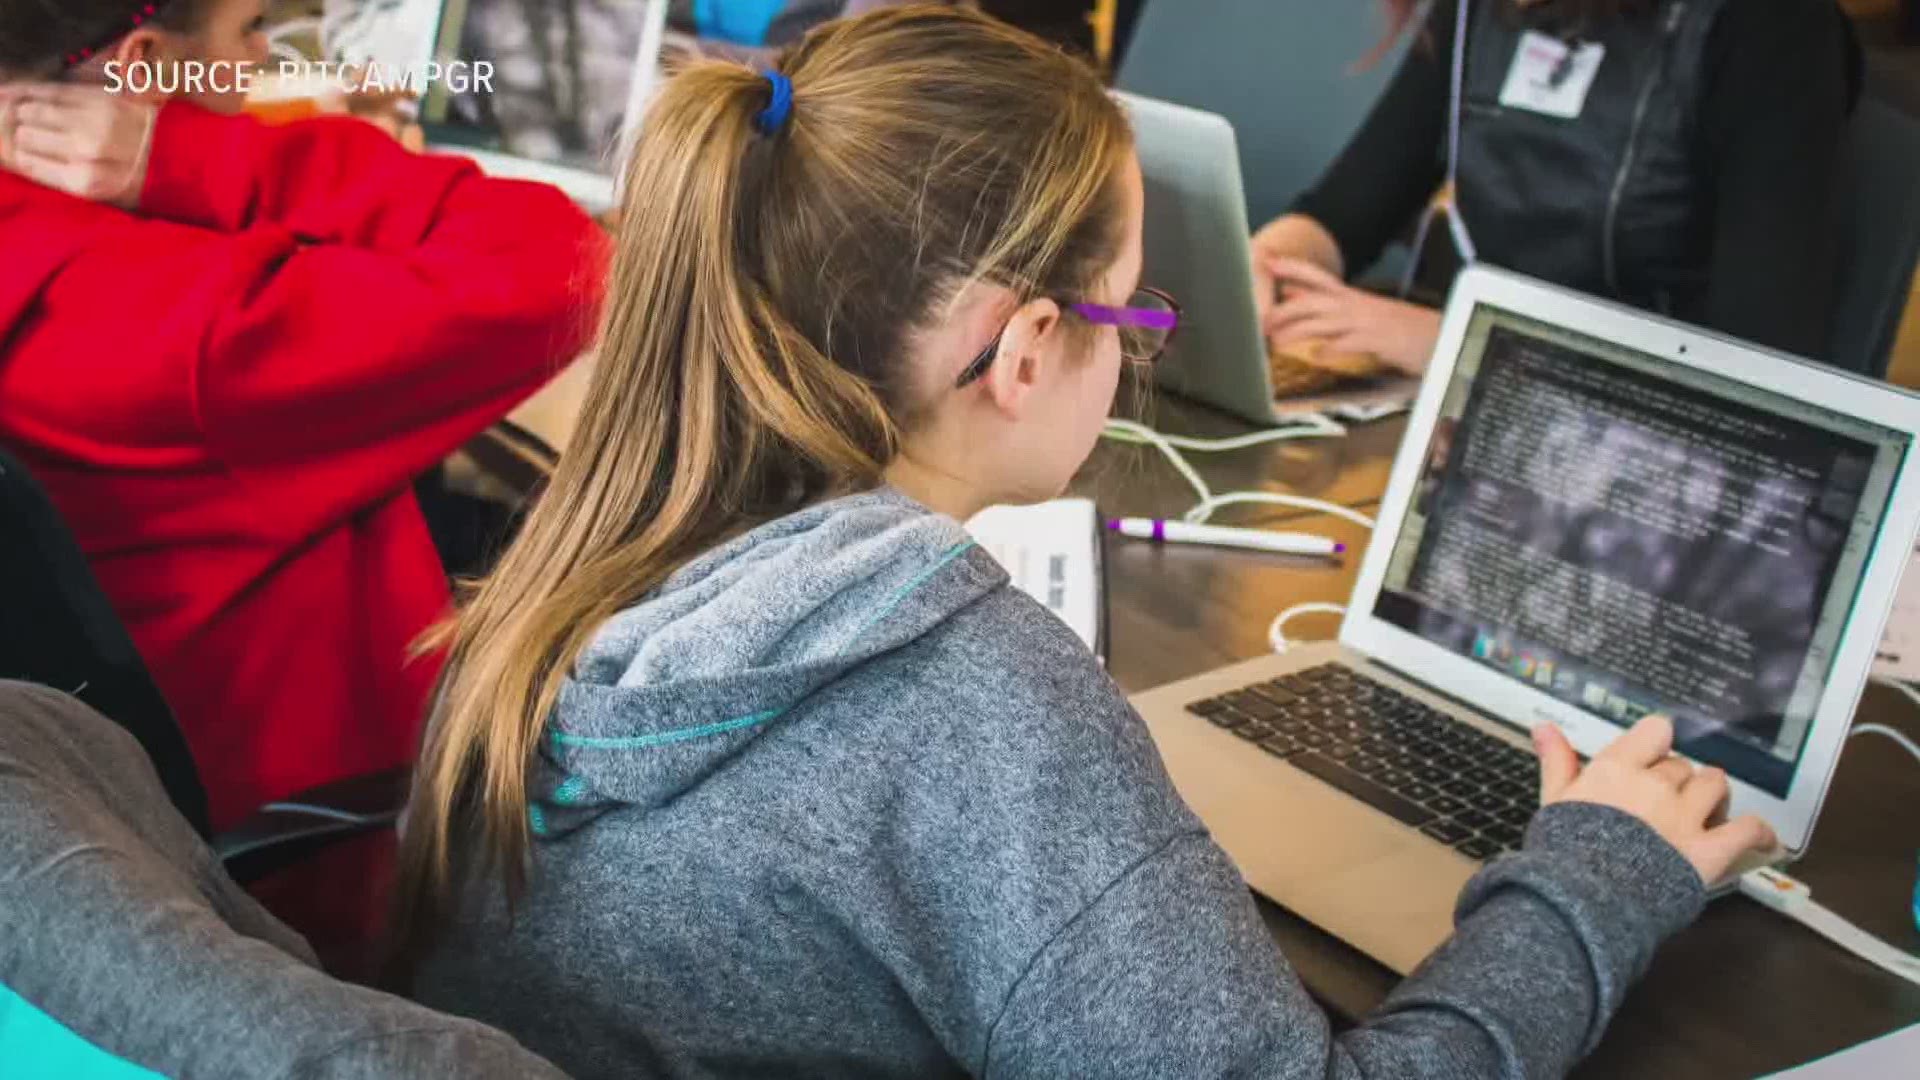 This weekend recognized National Girls Learning Code Day.